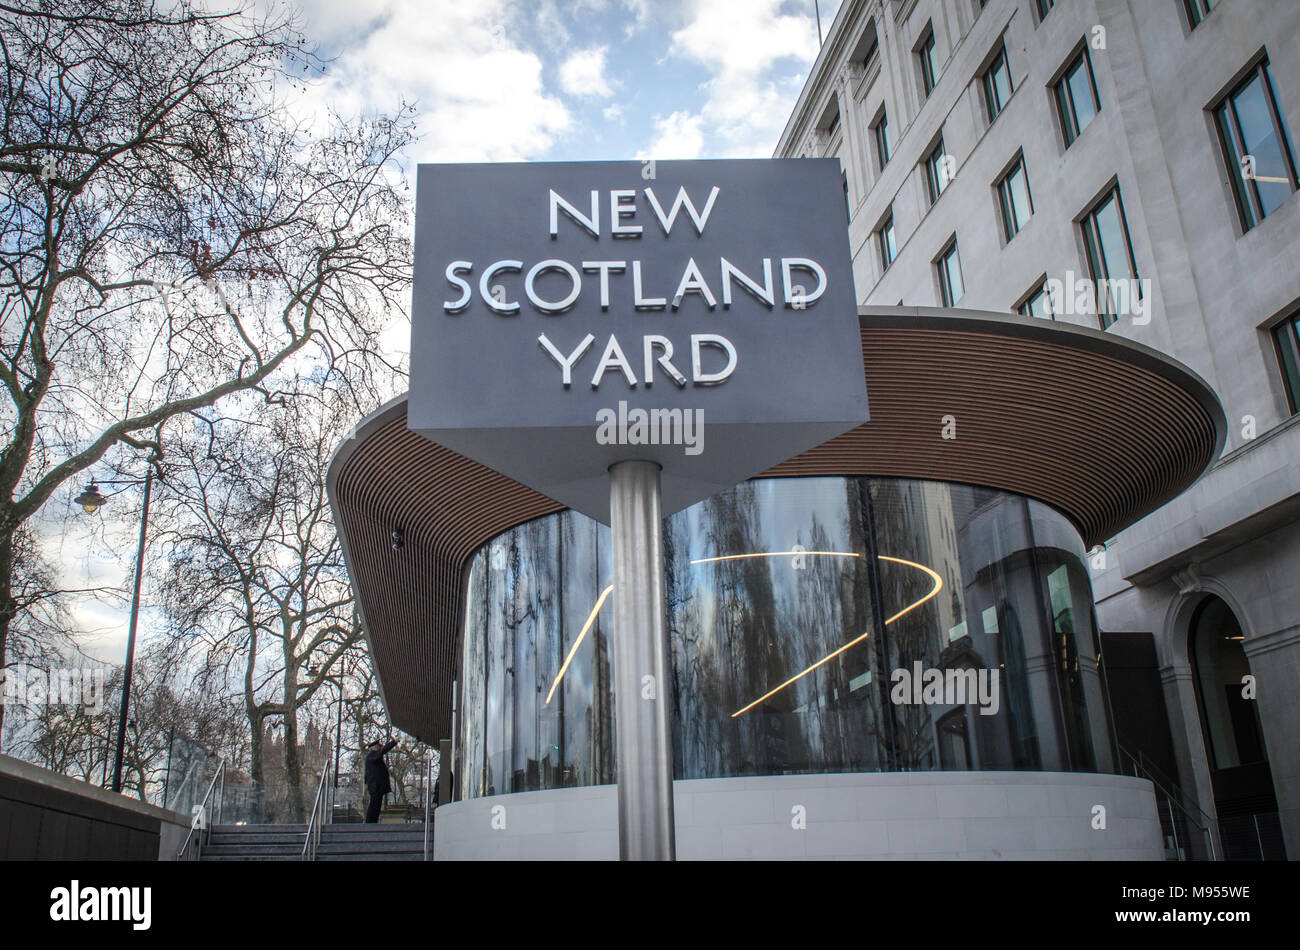 New Scotland Yard- the home of the Metropolitan Police Force headquarters, located on Victoria Embankment, London. Stock Photo